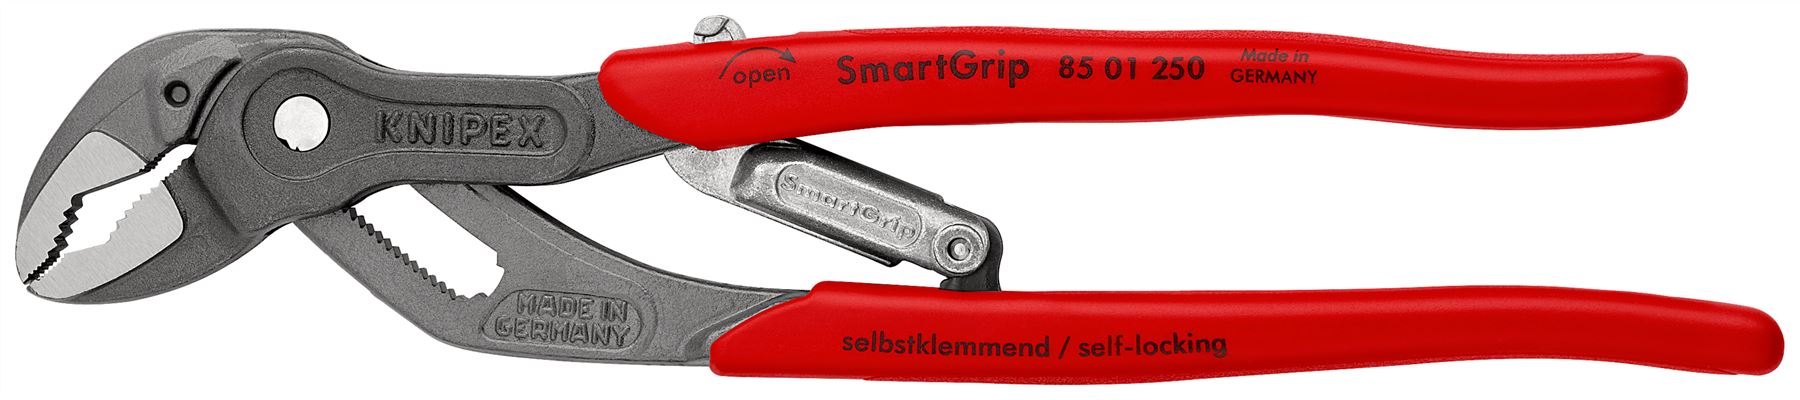 Knipex SmartGrip Water Pump Pliers with Automatic Adjustment 250mm 85 01 250